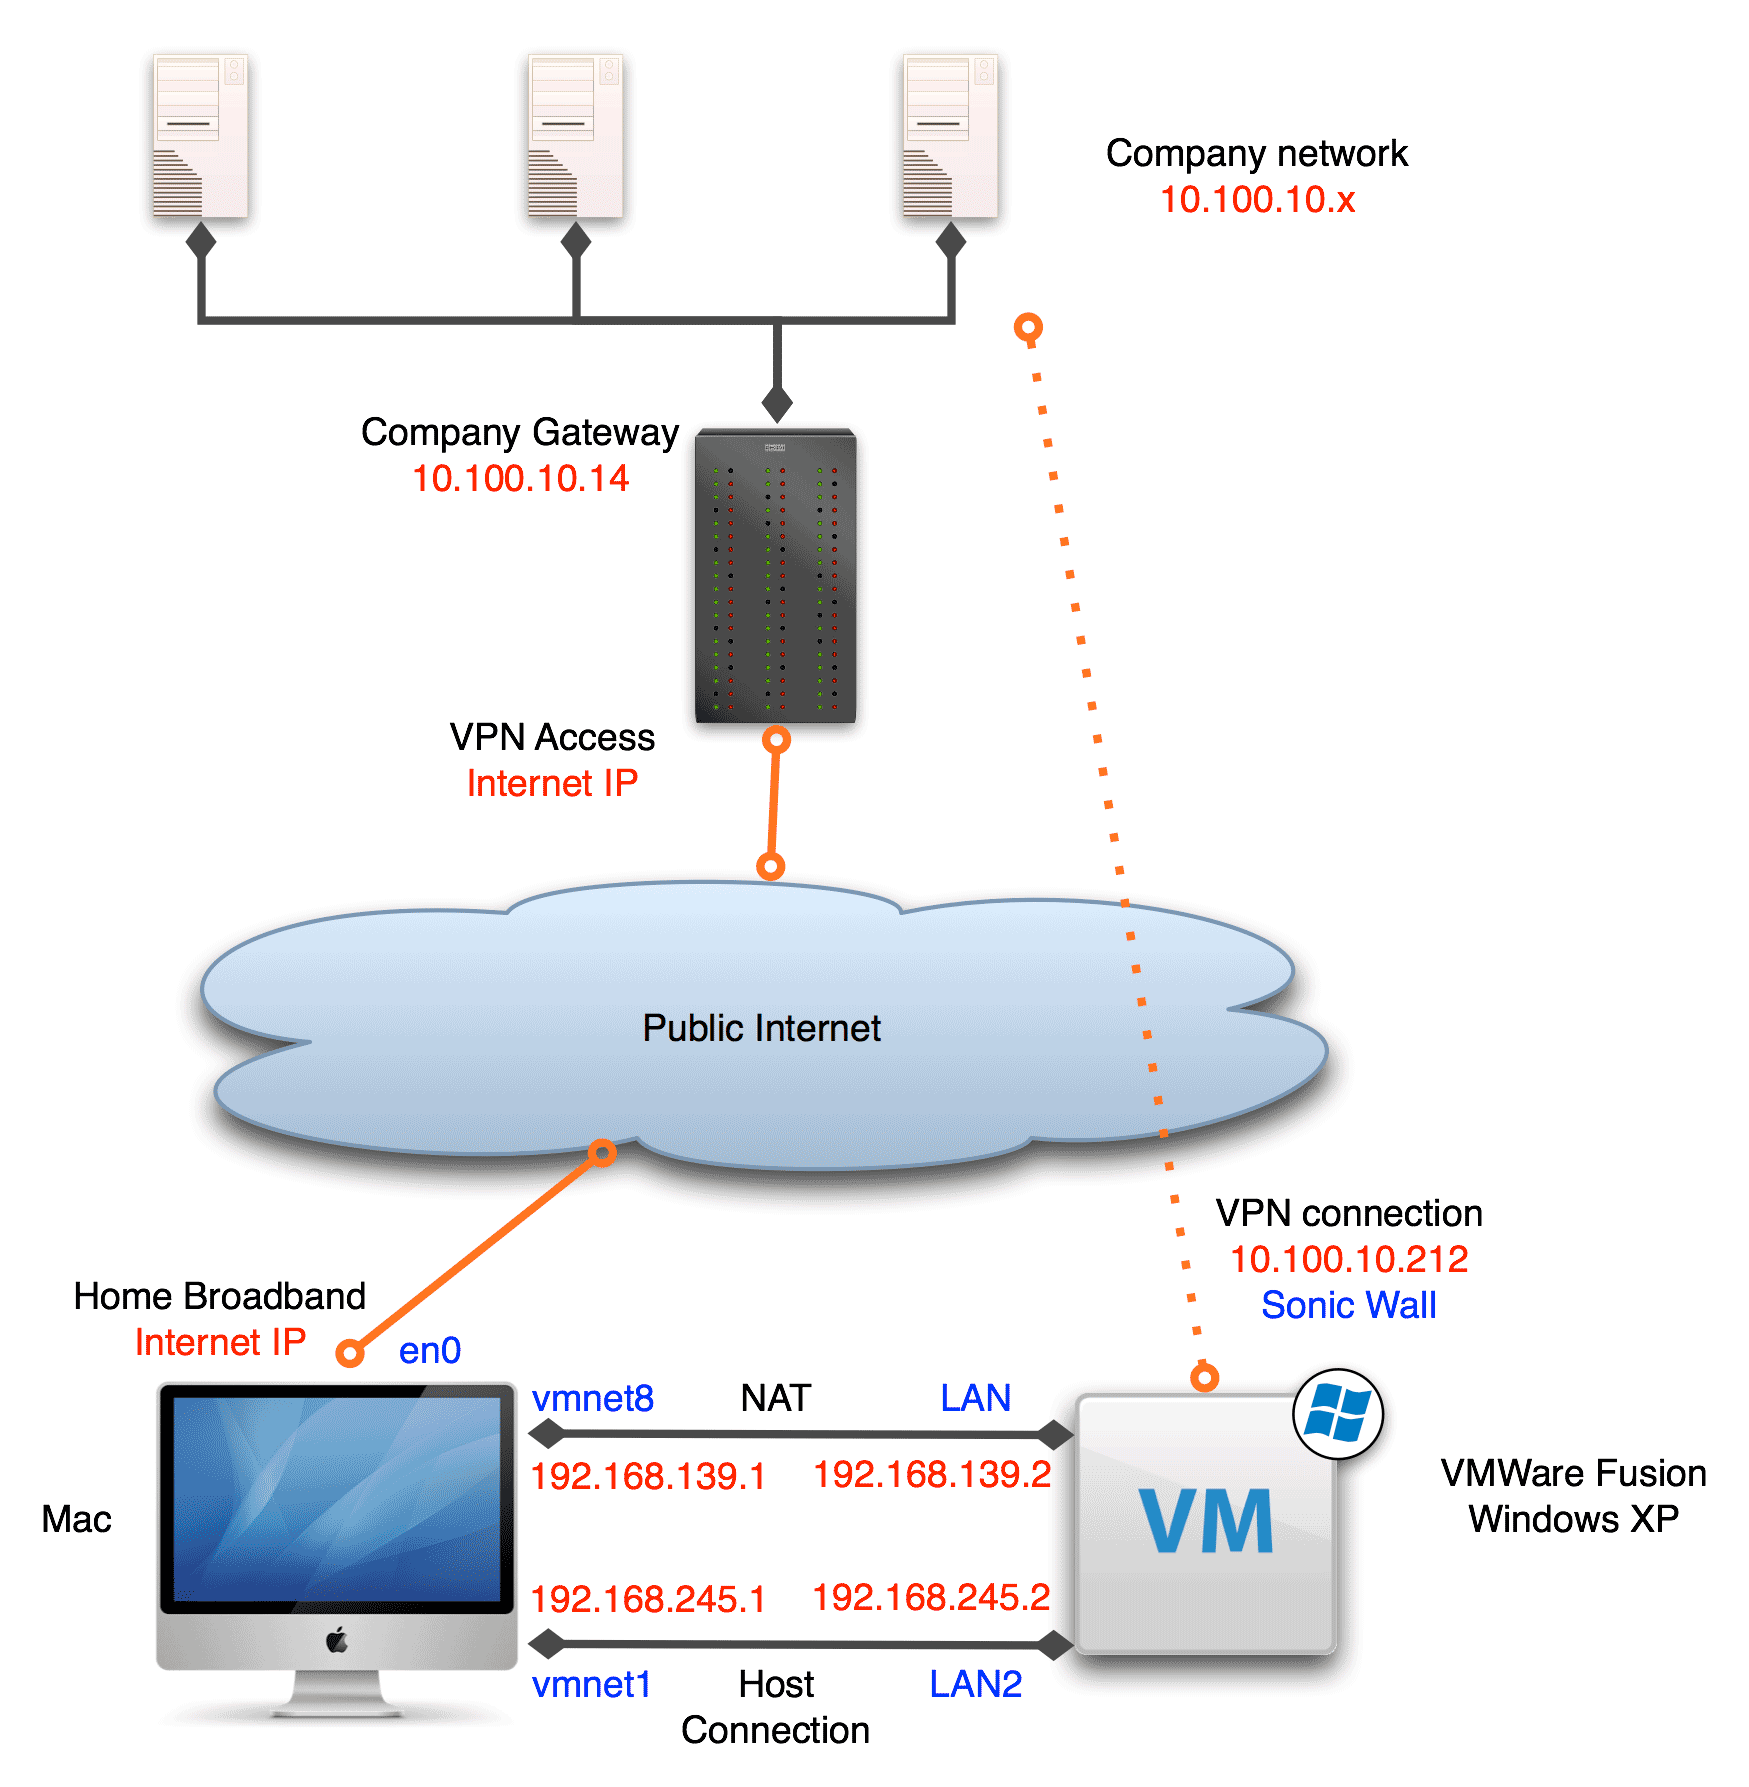 Overview of the VPN sharing setup